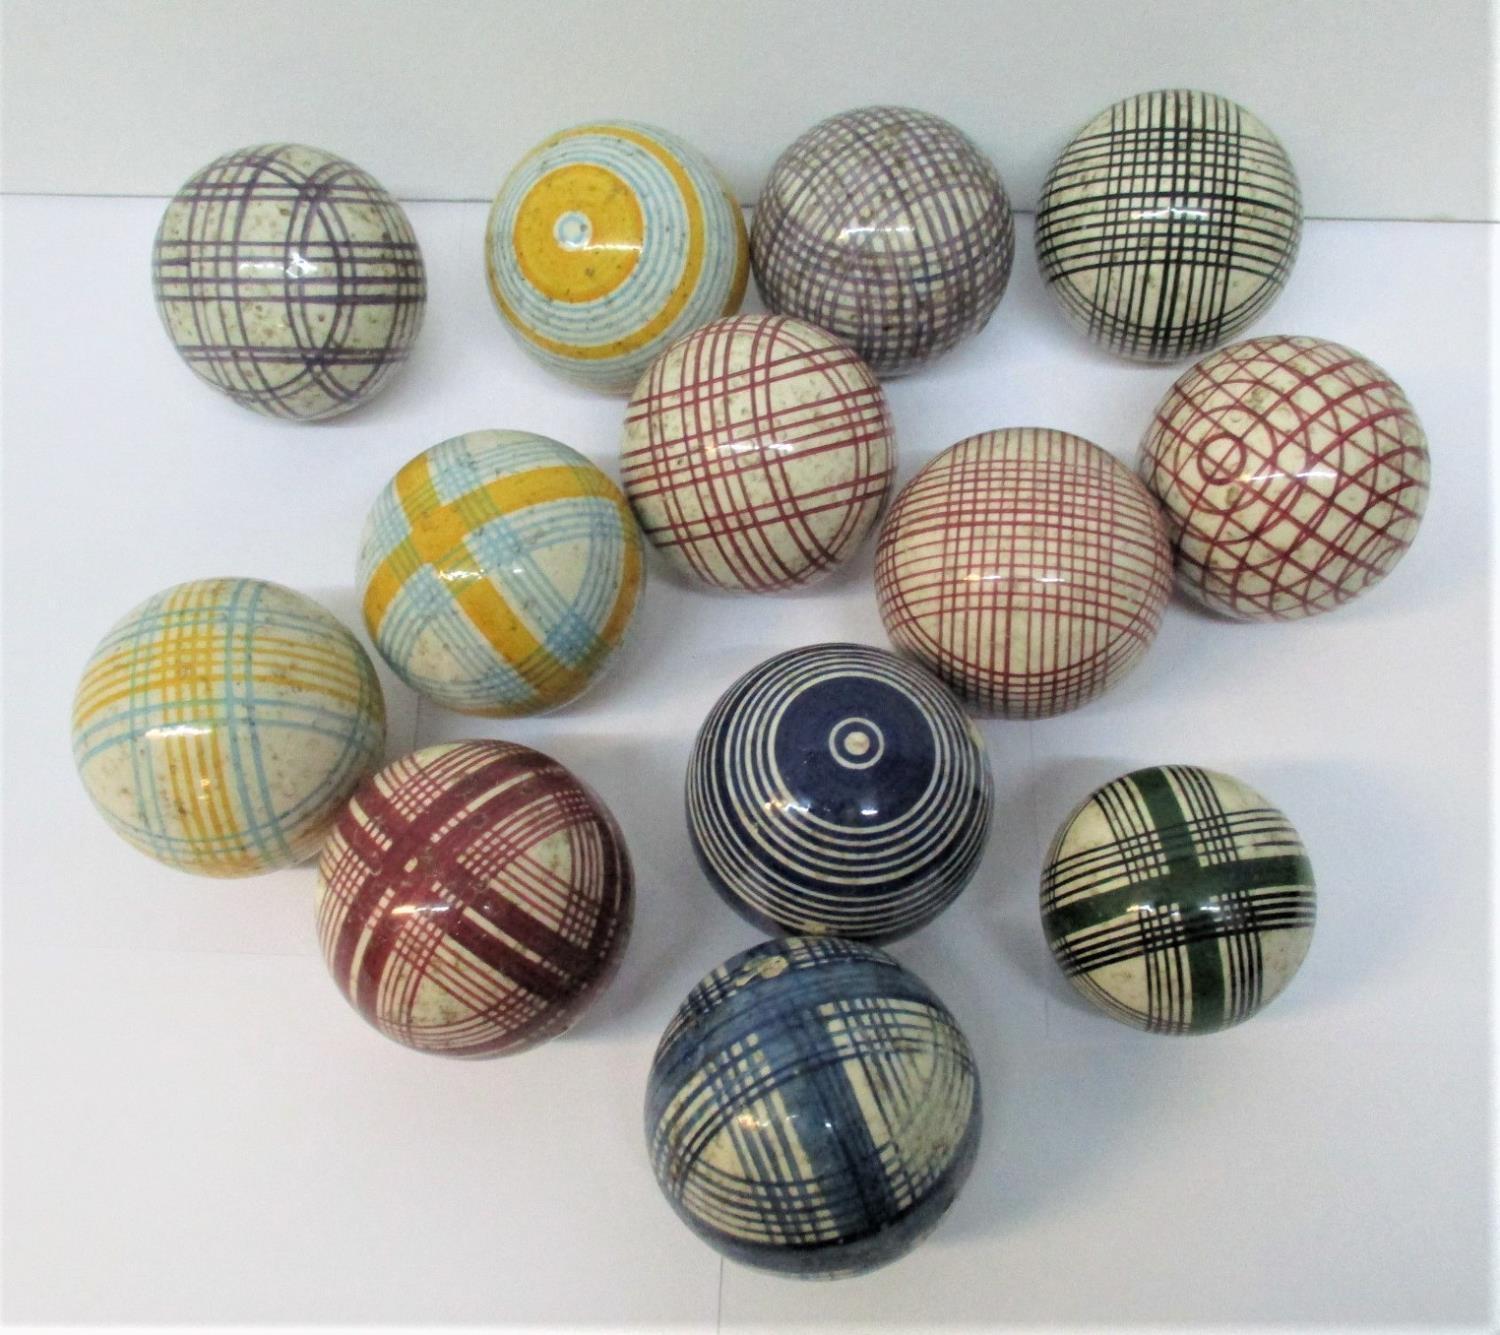 A group of thirteen Victorian Scottish ceramic carpet bowls, with colourful tartan and striped